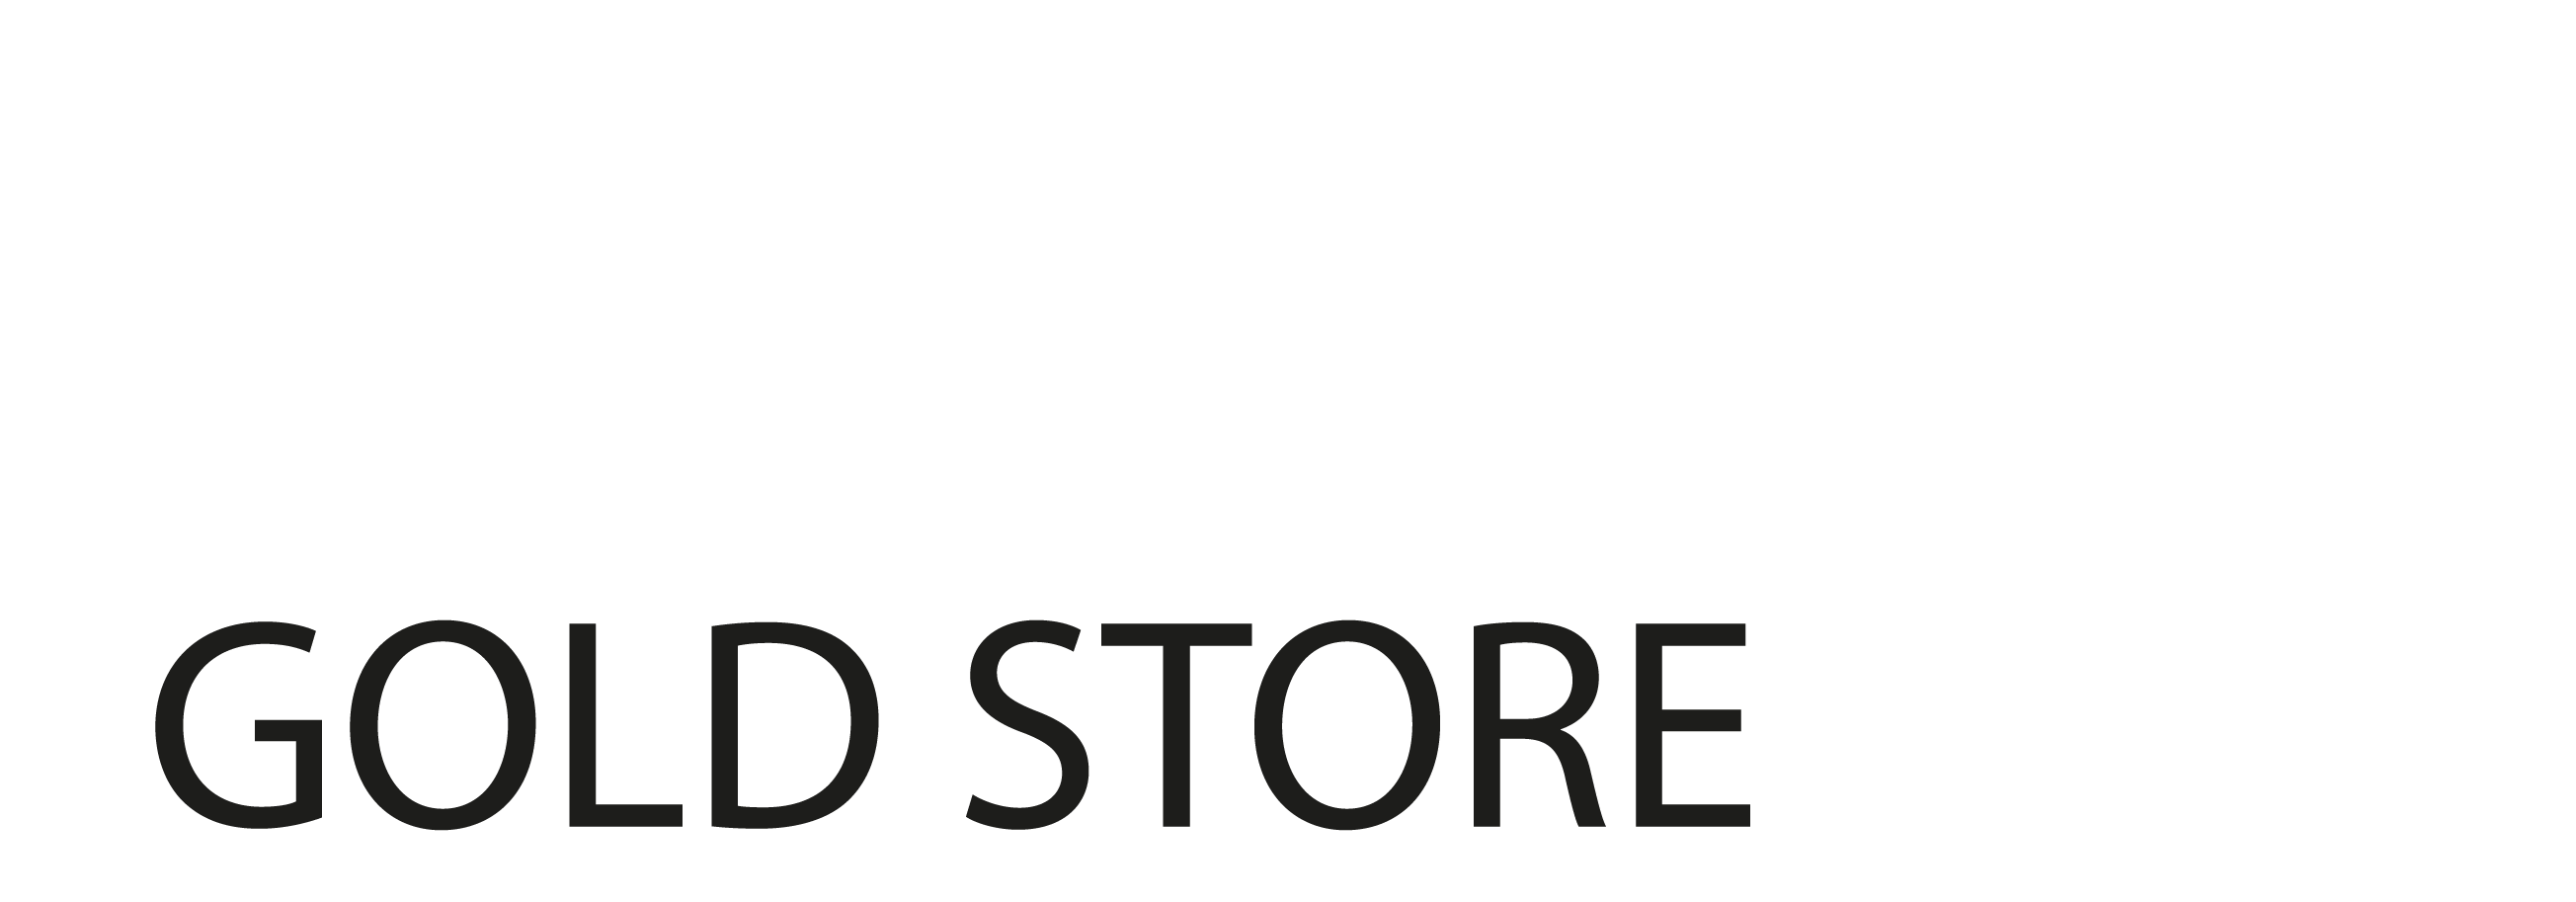 Asus Gold Store Firenze